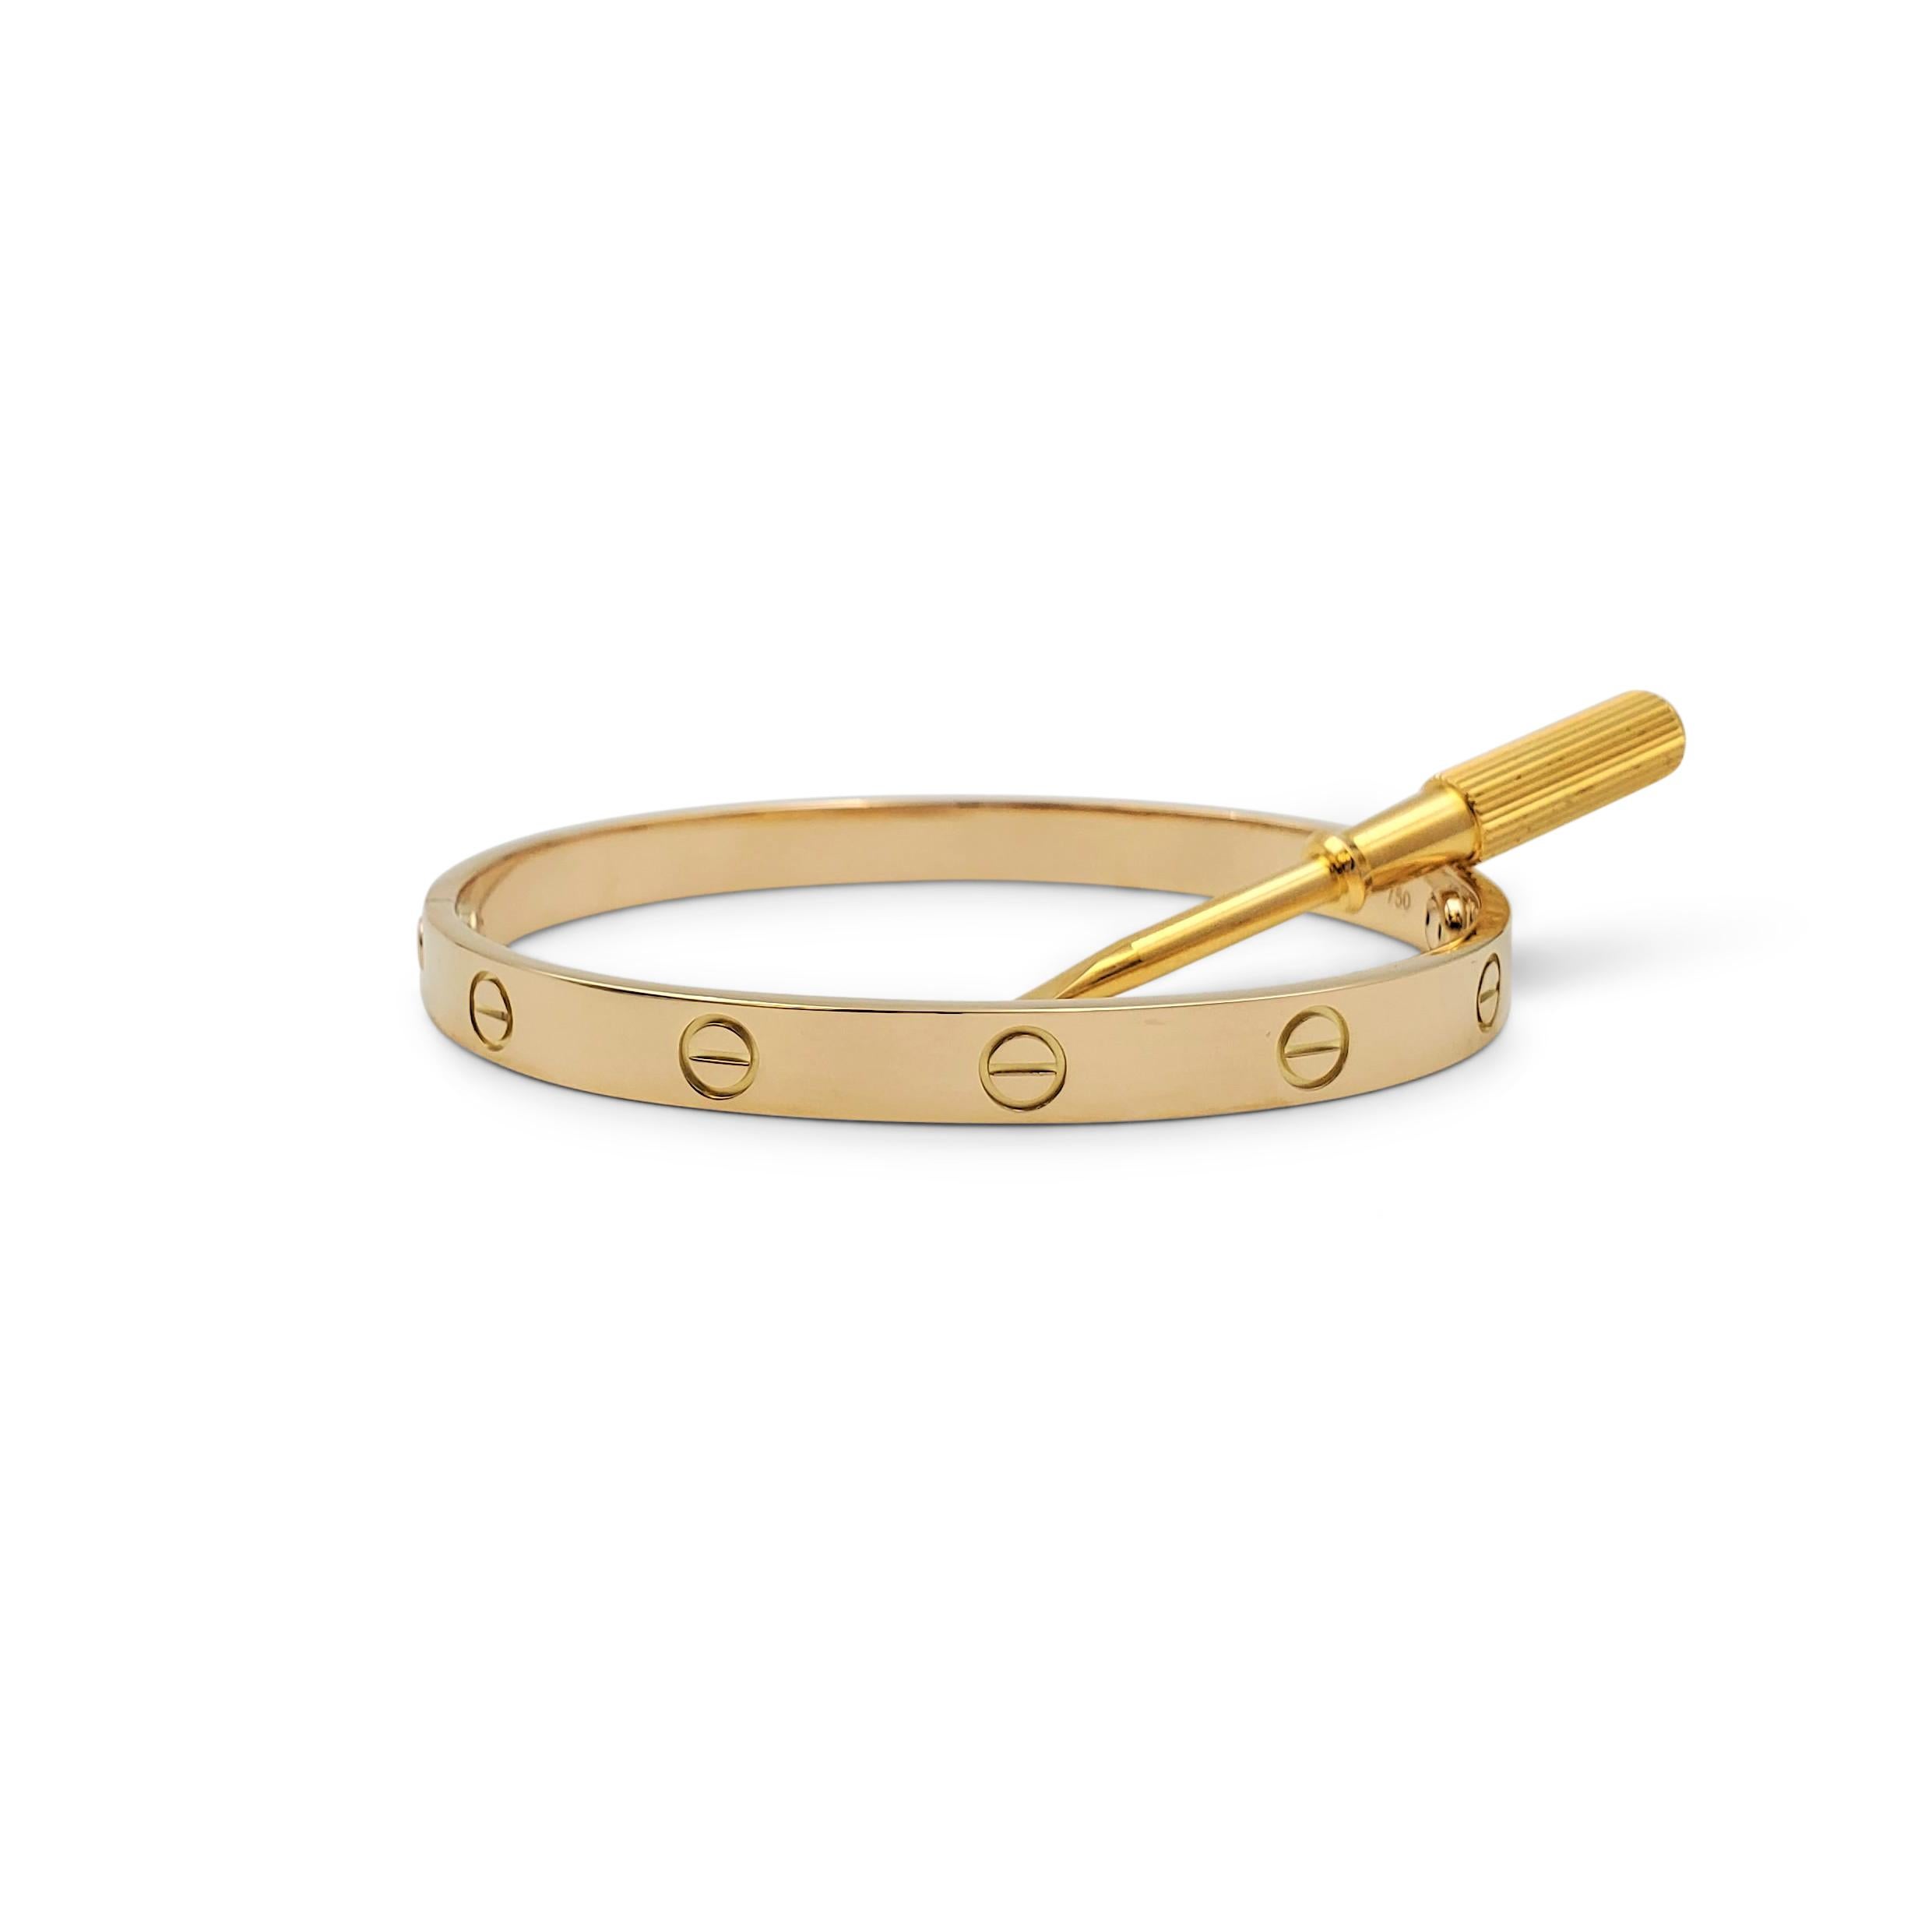 Authentic Cartier 'Love' bracelet crafted in 18 karat yellow gold. Signed Cartier, 18, Au750, with serial number and hallmarks. The bracelet is presented with the original screwdriver and box. No papers. CIRCA 2010s.

Bracelet Size: 18 (18 cm)
Box: